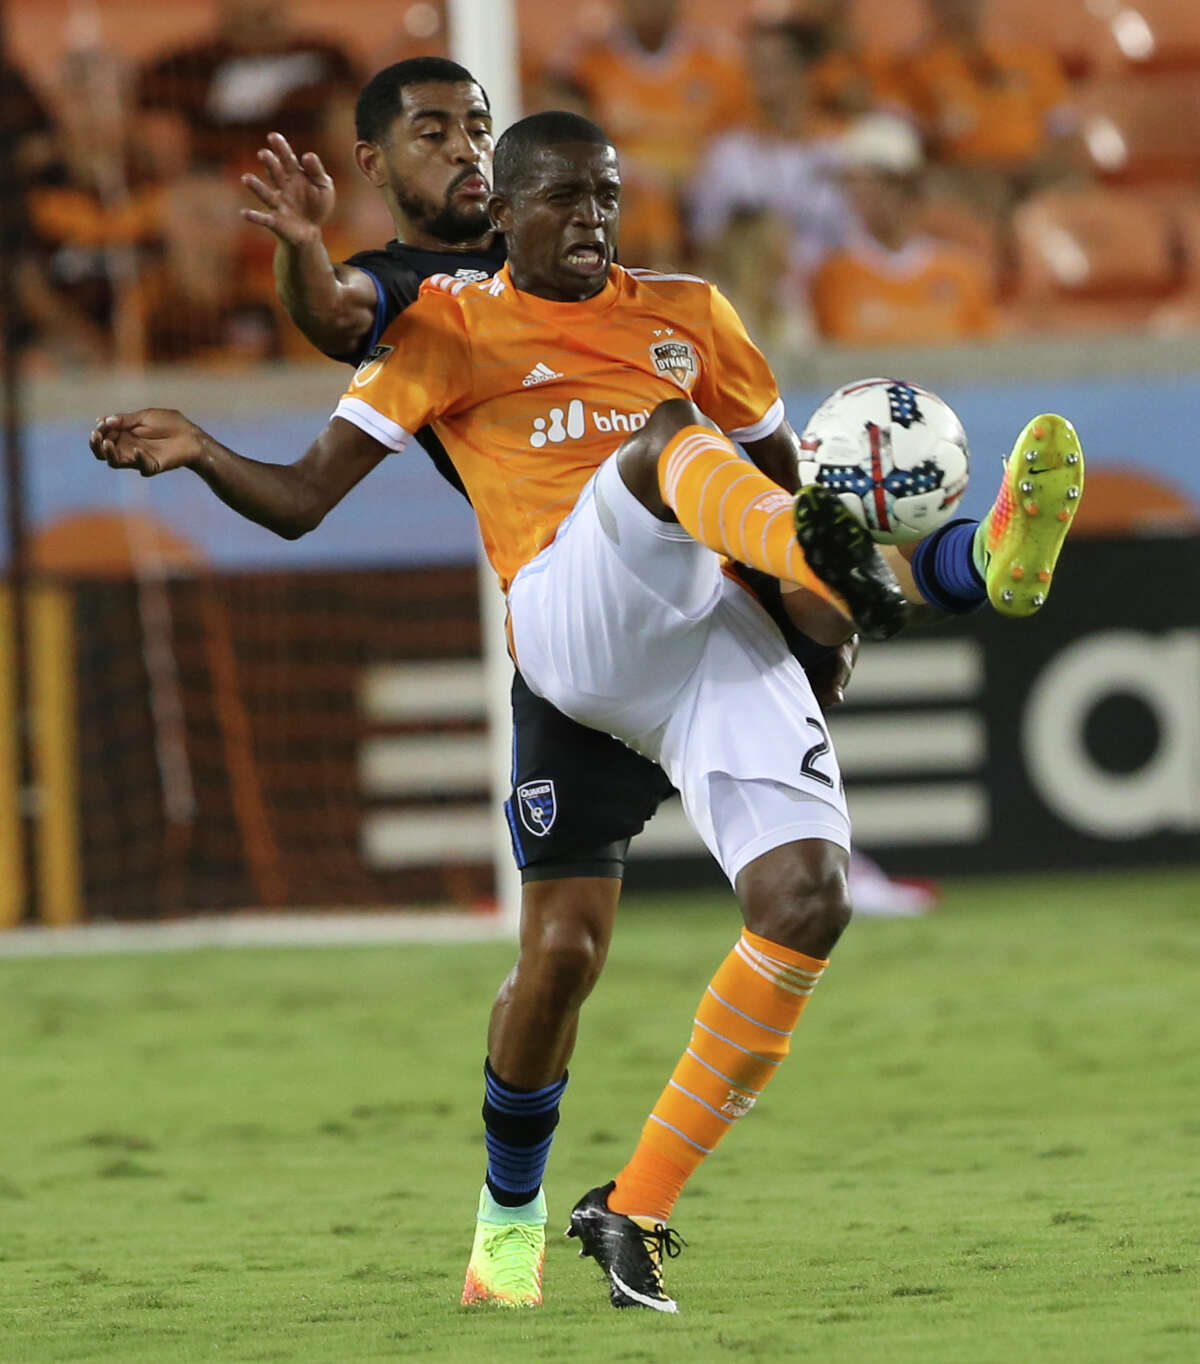 Midfielder Boniek Garcia﻿ may have seen his minutes decrease in 2017, but the suspension of Tomas Martinez because of a red card in the season finale could boost his playing time in the 2018 opener.